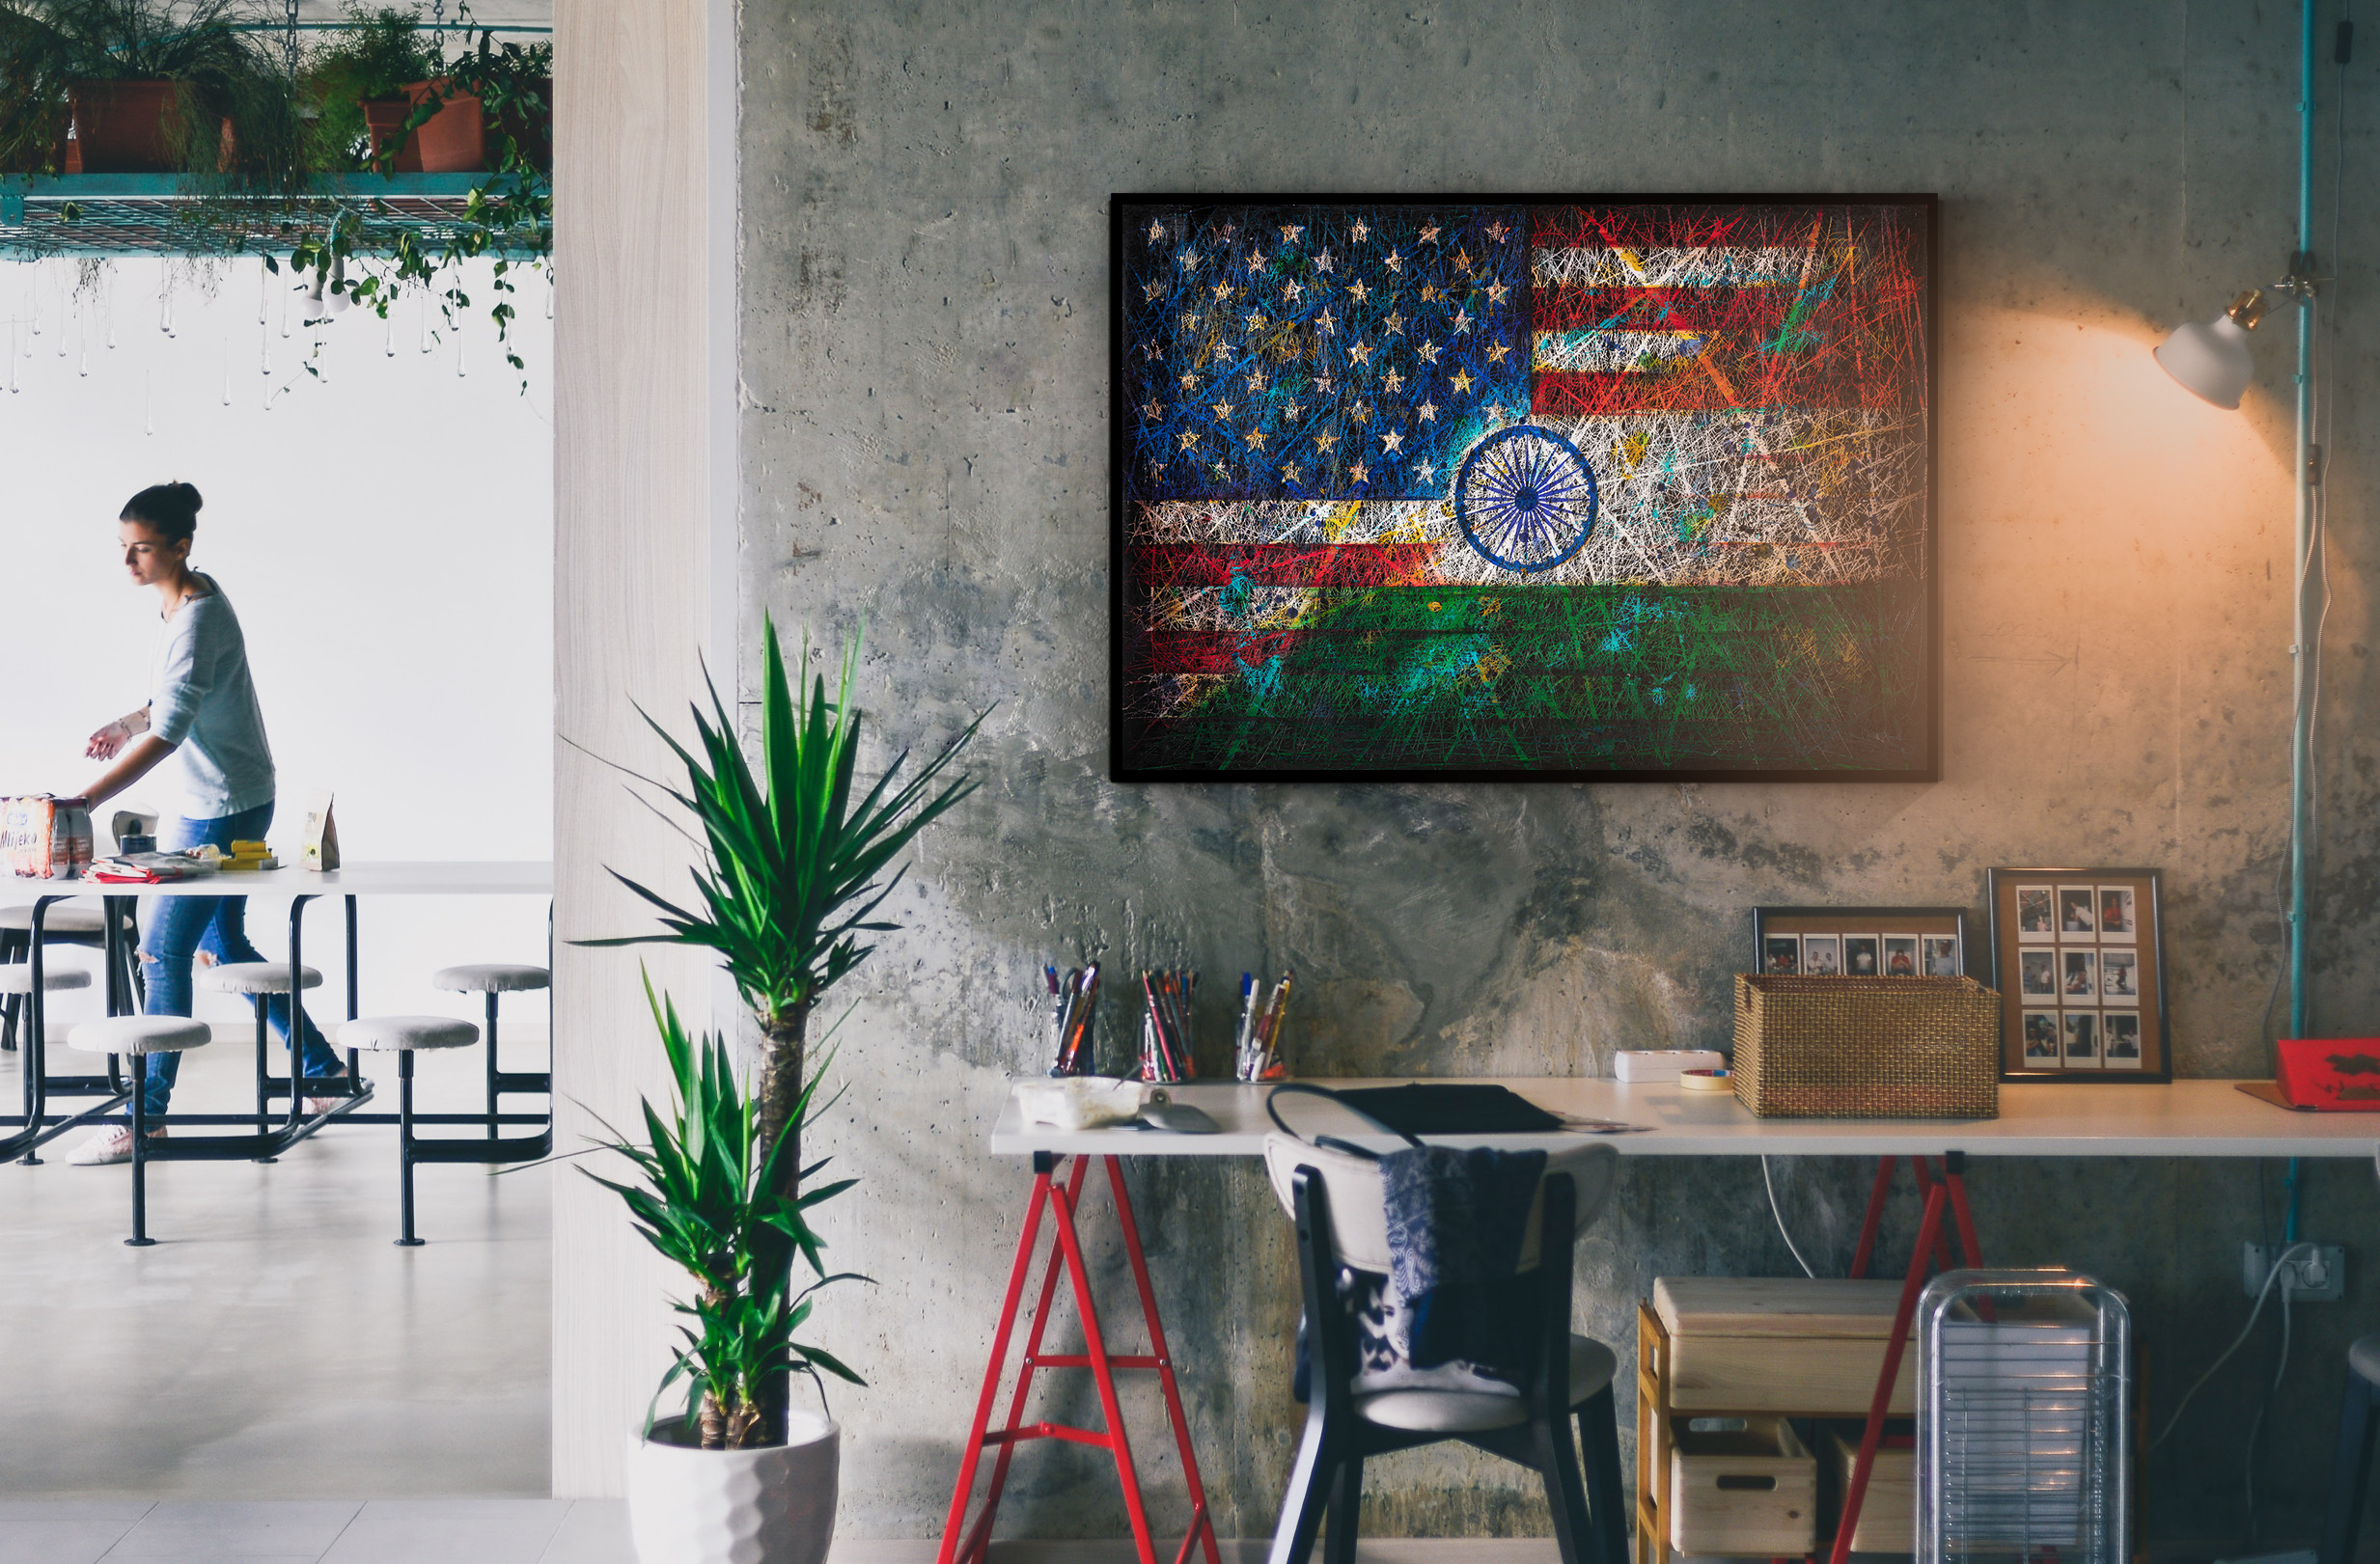 Printed Poster of USA& India Flags as Industrial Style Wall Decor